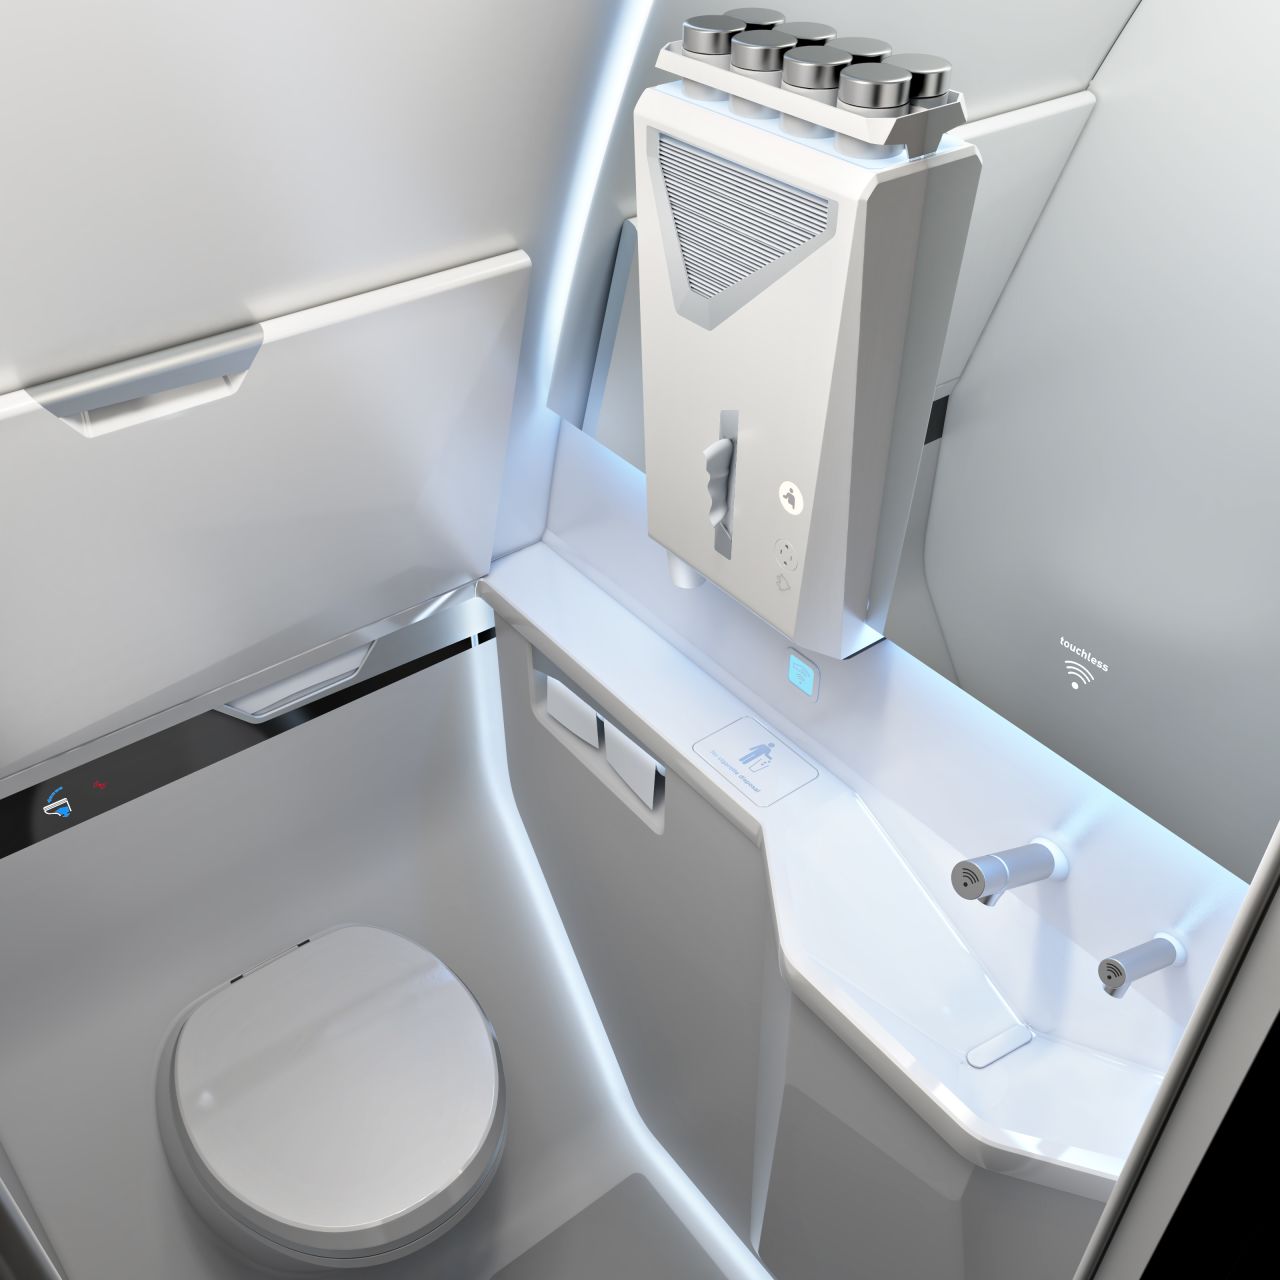 The Covid-19 pandemic has accelerated the need for <a href="https://edition.cnn.com/travel/article/no-touch-airplane-cabins-airports-covid-19/index.html" target="_blank">touchless technology</a>. Diehl Aviation, an aircraft interiors and solutions company, has designed a <a href="https://www.highlights-diehlaviation.com/en/fly-again-together/future-hygiene-solutions/touchless-lavatory/" target="_blank" target="_blank">touchless lavatory</a>, using highly sensitive sensors across all toilet functions. The door lock, the toilet lid, the flush, the taps, and the waste bin flap are all controlled hands-free. <br />